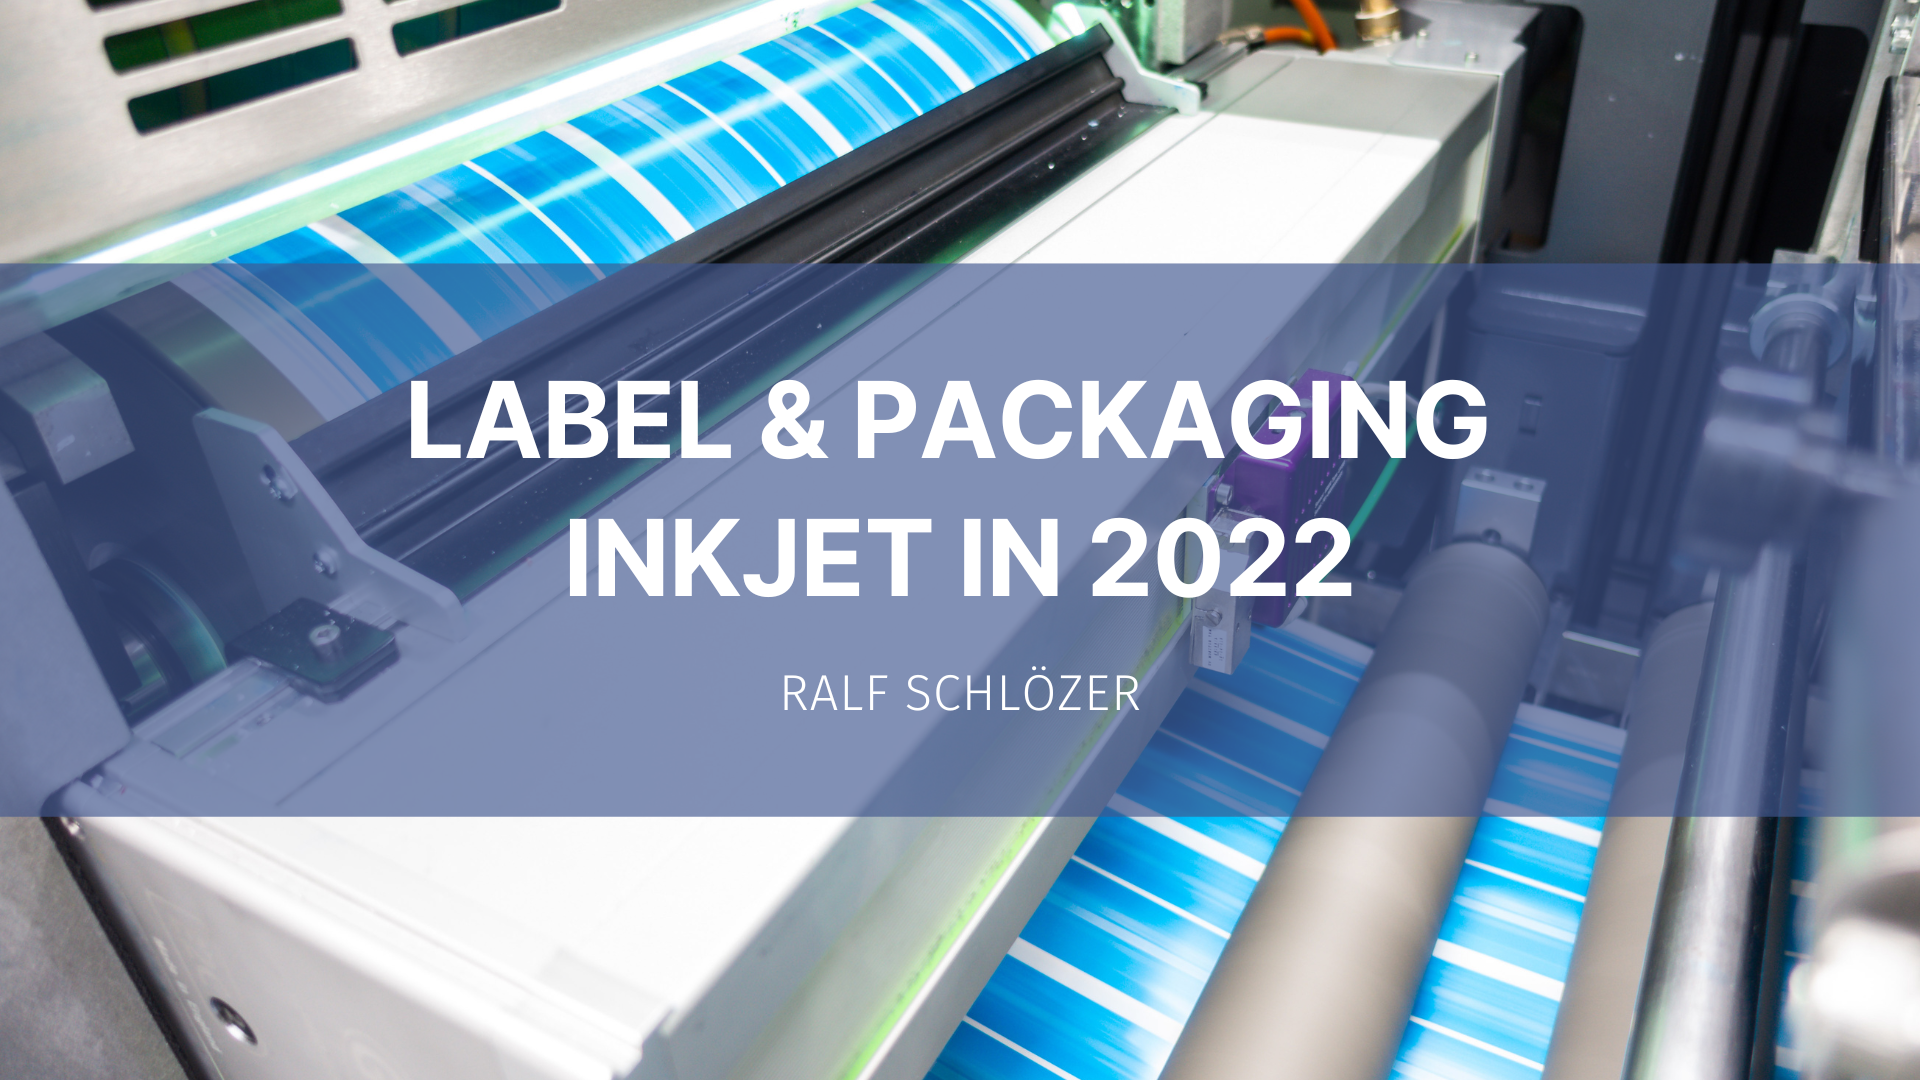 Featured image for “Label & Packaging Inkjet in 2022”